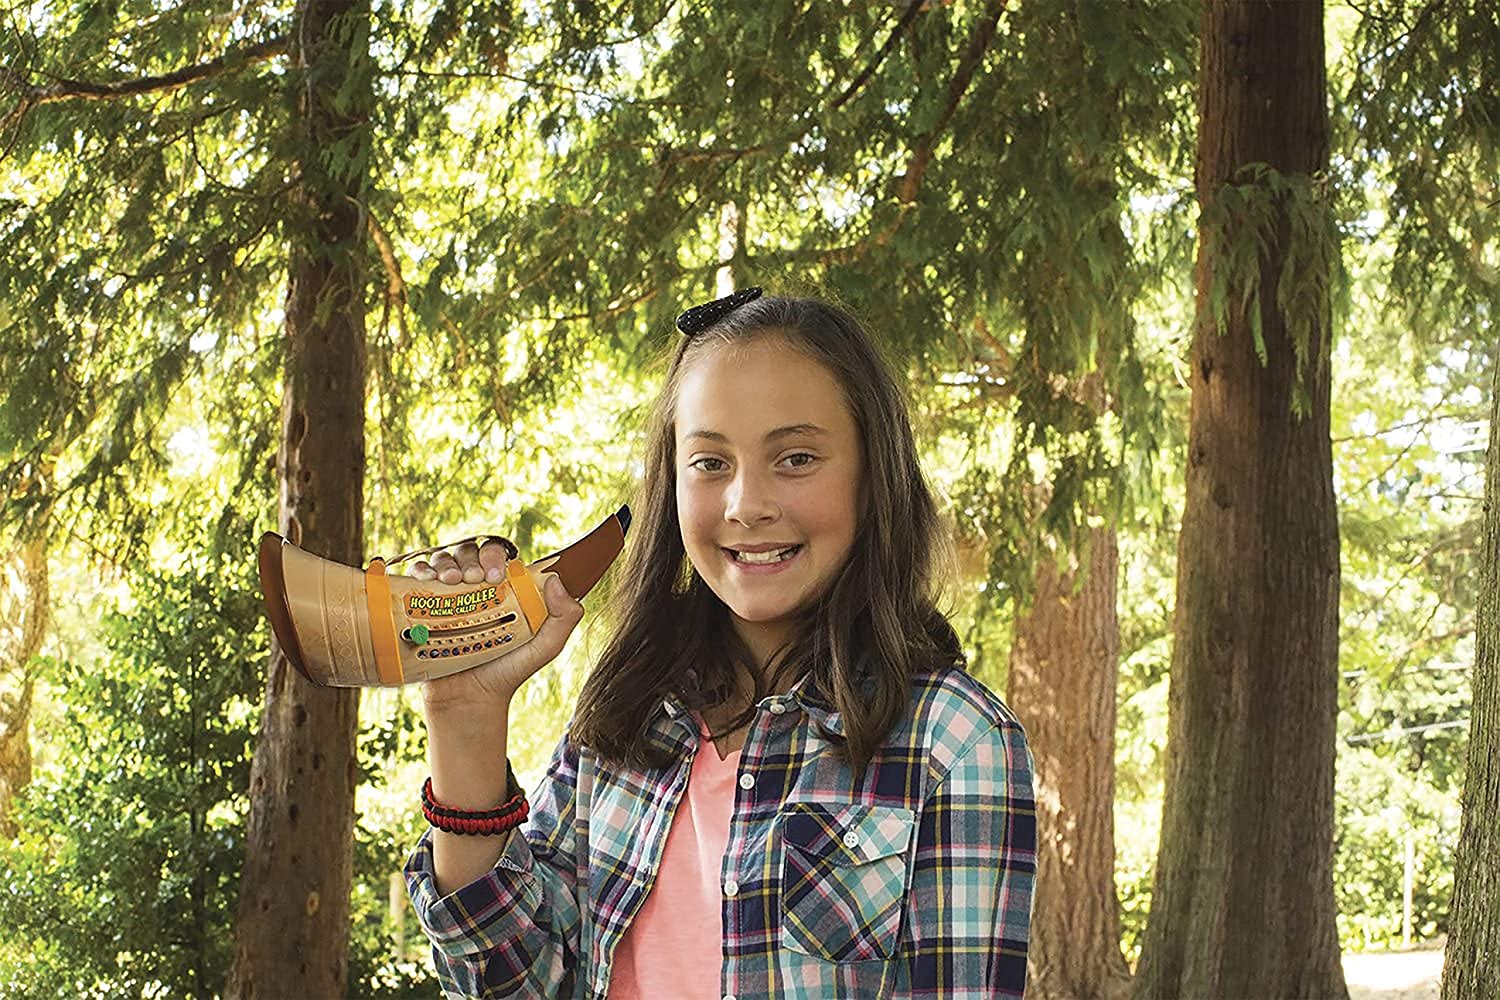 A girl is outdoors smiling and holding a hoot n holler animal caller toy.